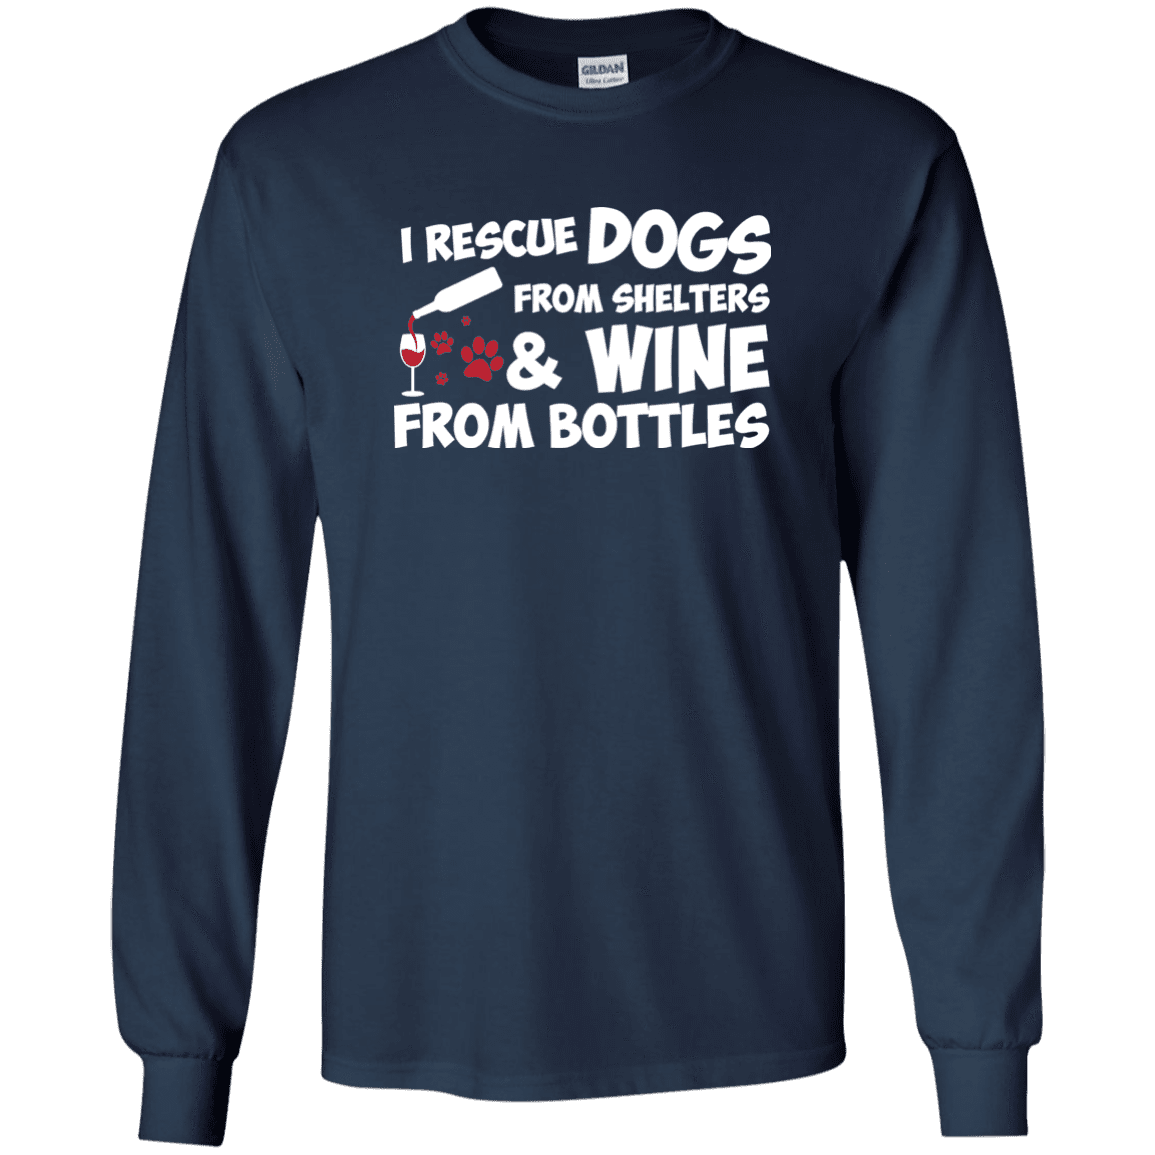 I Rescue Dogs And Wine - Long Sleeve T Shirt.